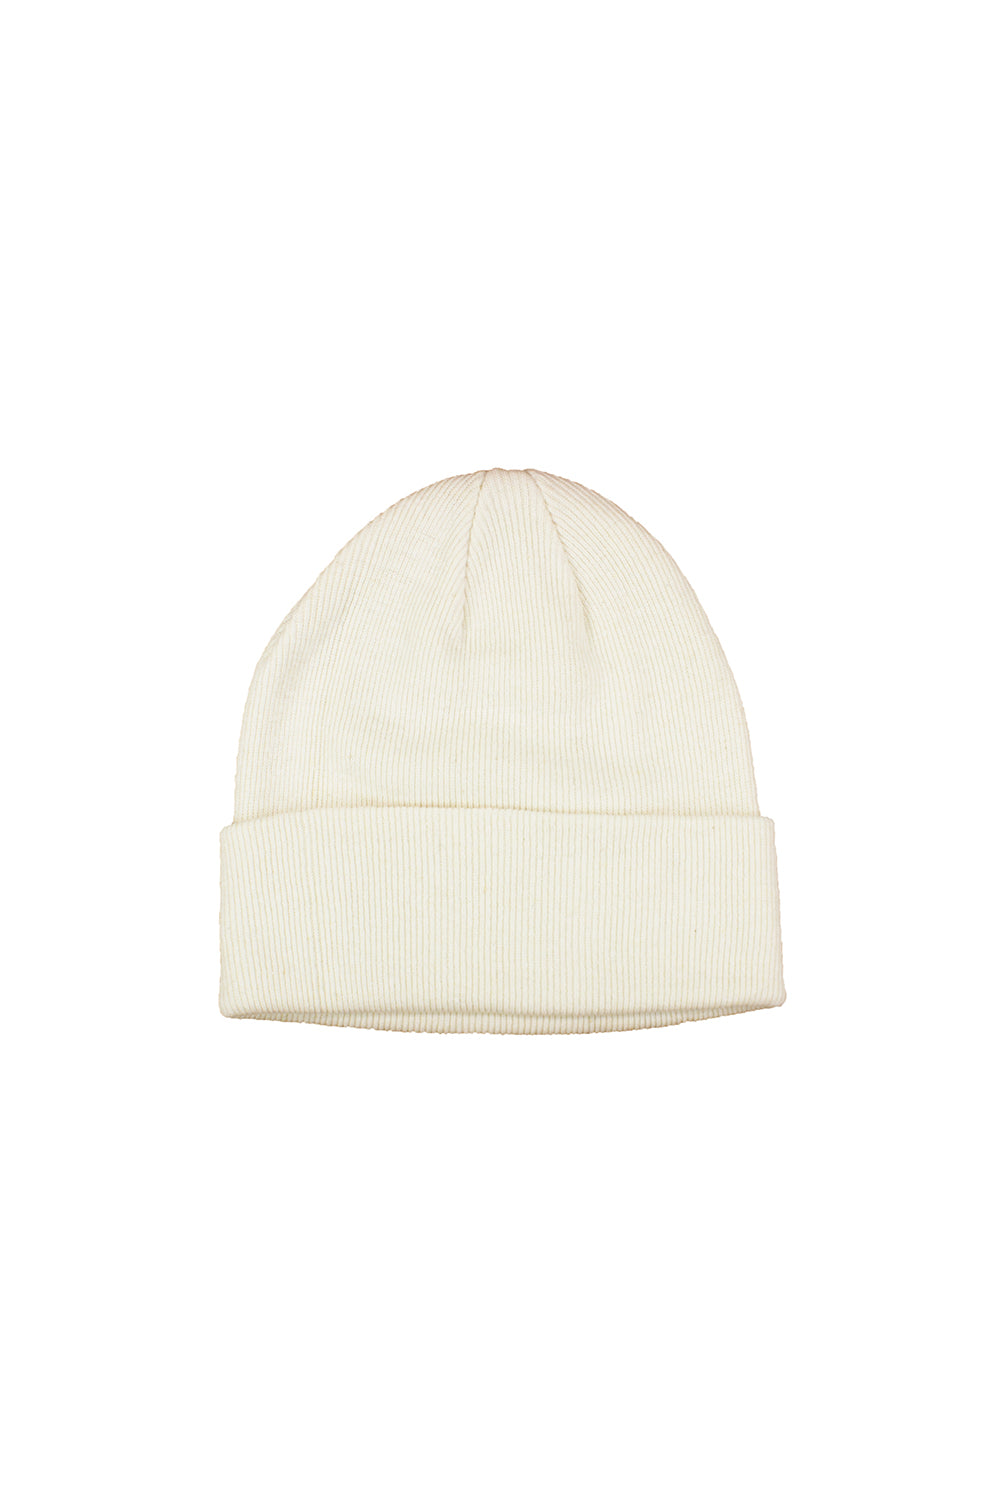 Walla Walla Beanie | Jungmaven Hemp Clothing & Accessories / Color: Washed White